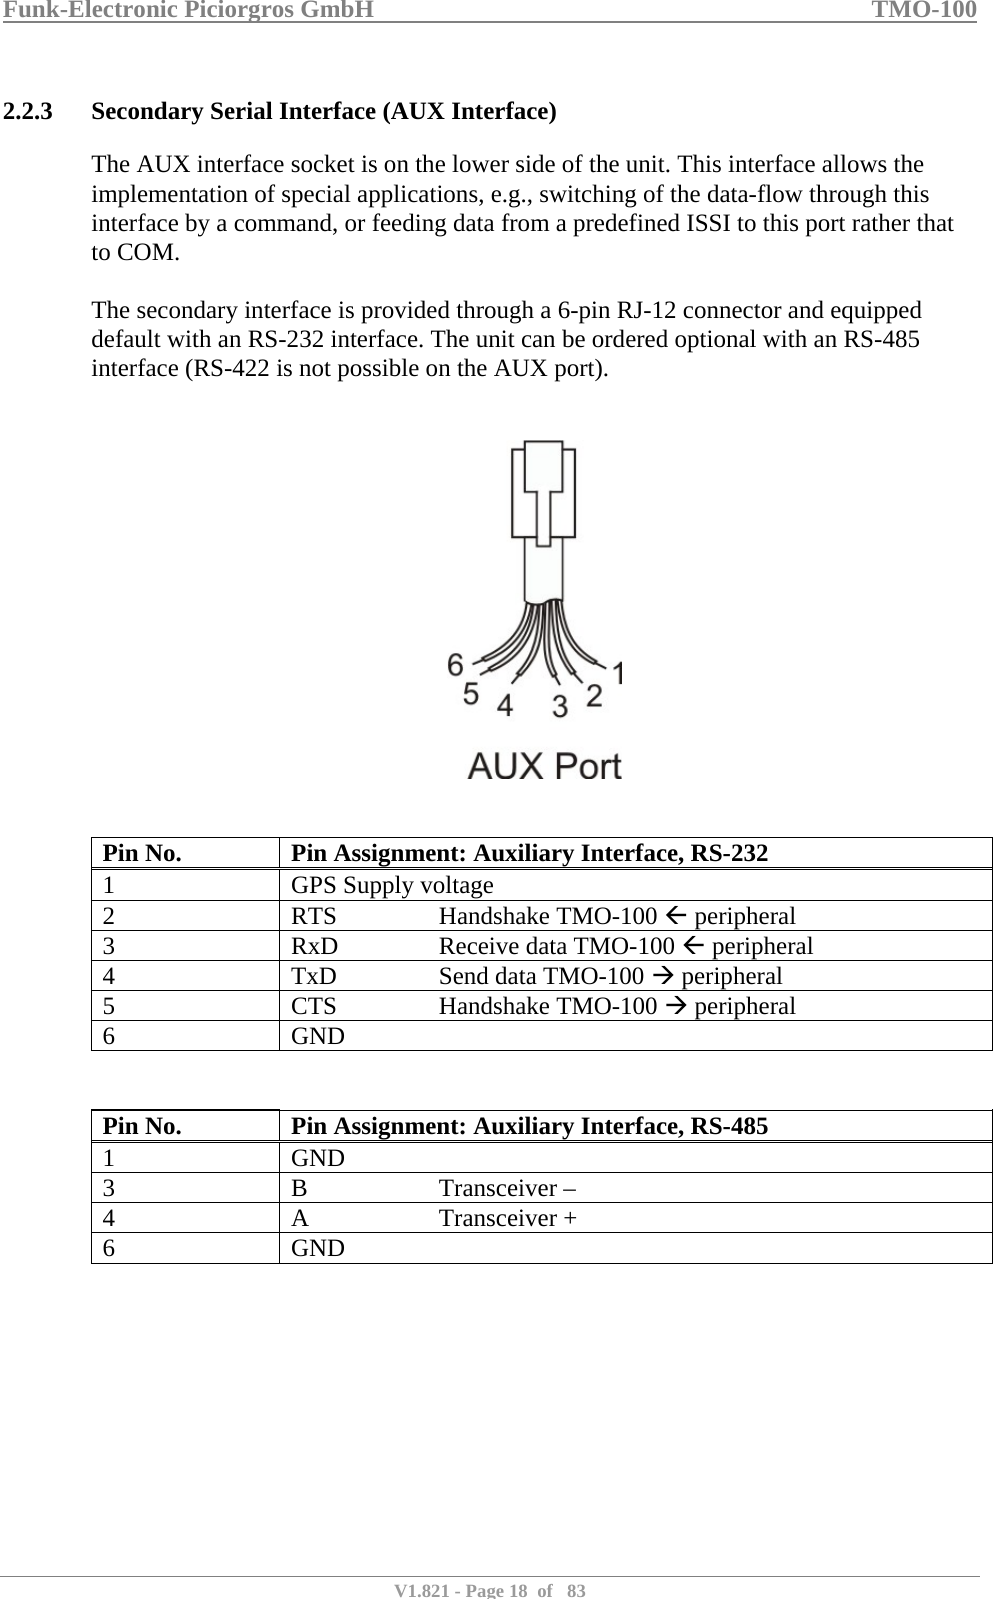 Funk-Electronic Piciorgros GmbH   TMO-100   V1.821 - Page 18  of   83   2.2.3 Secondary Serial Interface (AUX Interface) The AUX interface socket is on the lower side of the unit. This interface allows the implementation of special applications, e.g., switching of the data-flow through this interface by a command, or feeding data from a predefined ISSI to this port rather that to COM.  The secondary interface is provided through a 6-pin RJ-12 connector and equipped default with an RS-232 interface. The unit can be ordered optional with an RS-485 interface (RS-422 is not possible on the AUX port).      Pin No.  Pin Assignment: Auxiliary Interface, RS-232 1  GPS Supply voltage 2 RTS  Handshake TMO-100 Å peripheral 3  RxD    Receive data TMO-100 Å peripheral 4  TxD    Send data TMO-100 Æ peripheral 5 CTS  Handshake TMO-100 Æ peripheral 6 GND   Pin No.  Pin Assignment: Auxiliary Interface, RS-485 1 GND 3 B  Transceiver – 4 A  Transceiver + 6 GND  